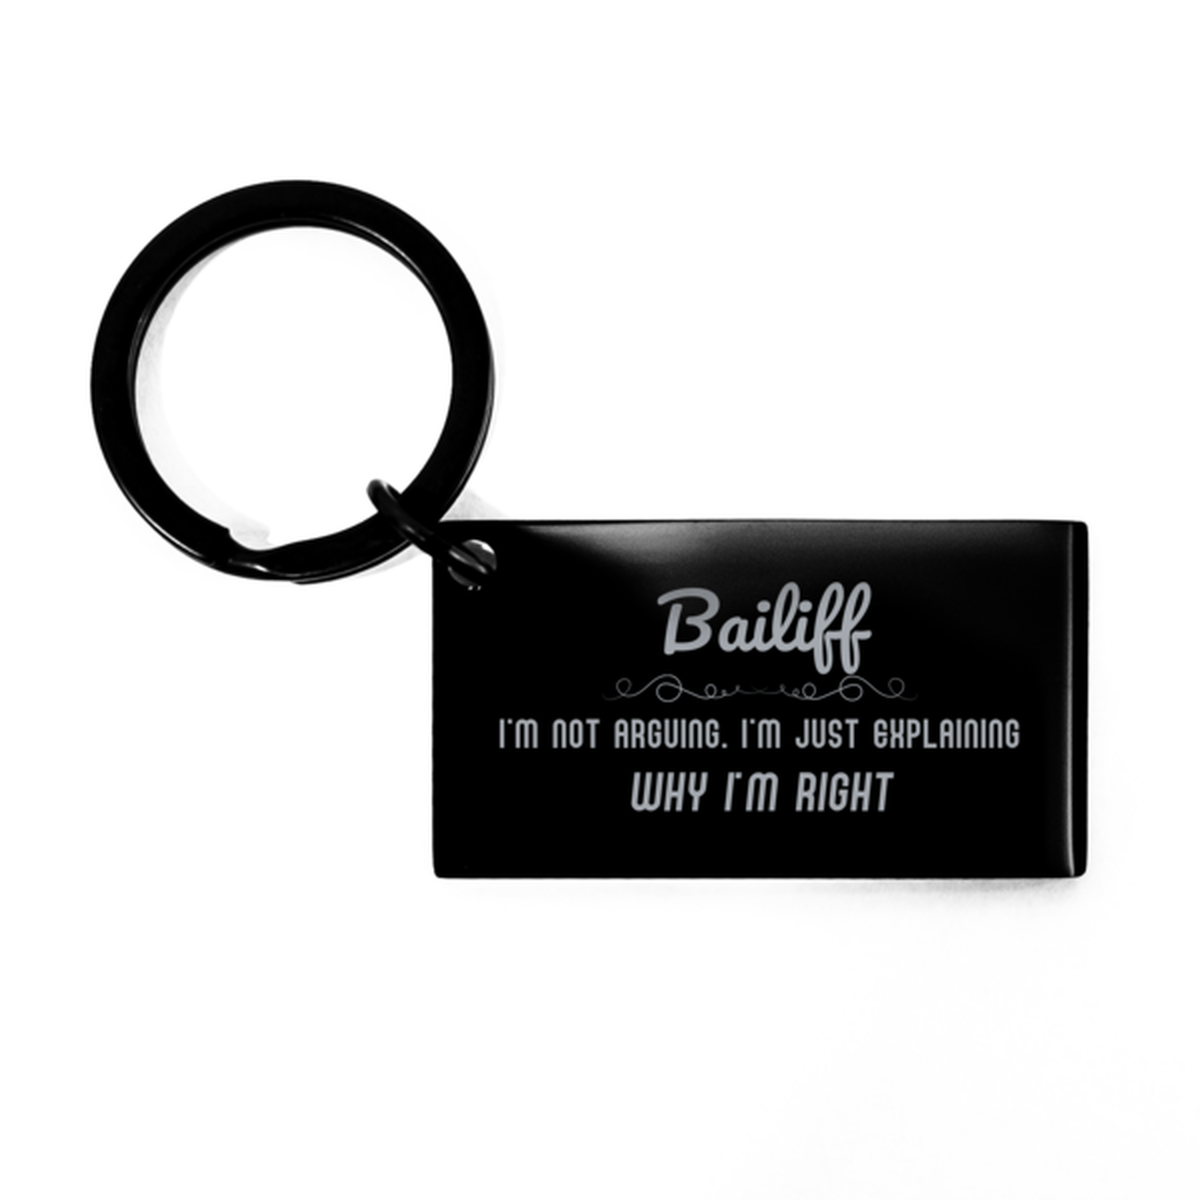 Bailiff I'm not Arguing. I'm Just Explaining Why I'm RIGHT Keychain, Funny Saying Quote Bailiff Gifts For Bailiff Graduation Birthday Christmas Gifts for Men Women Coworker